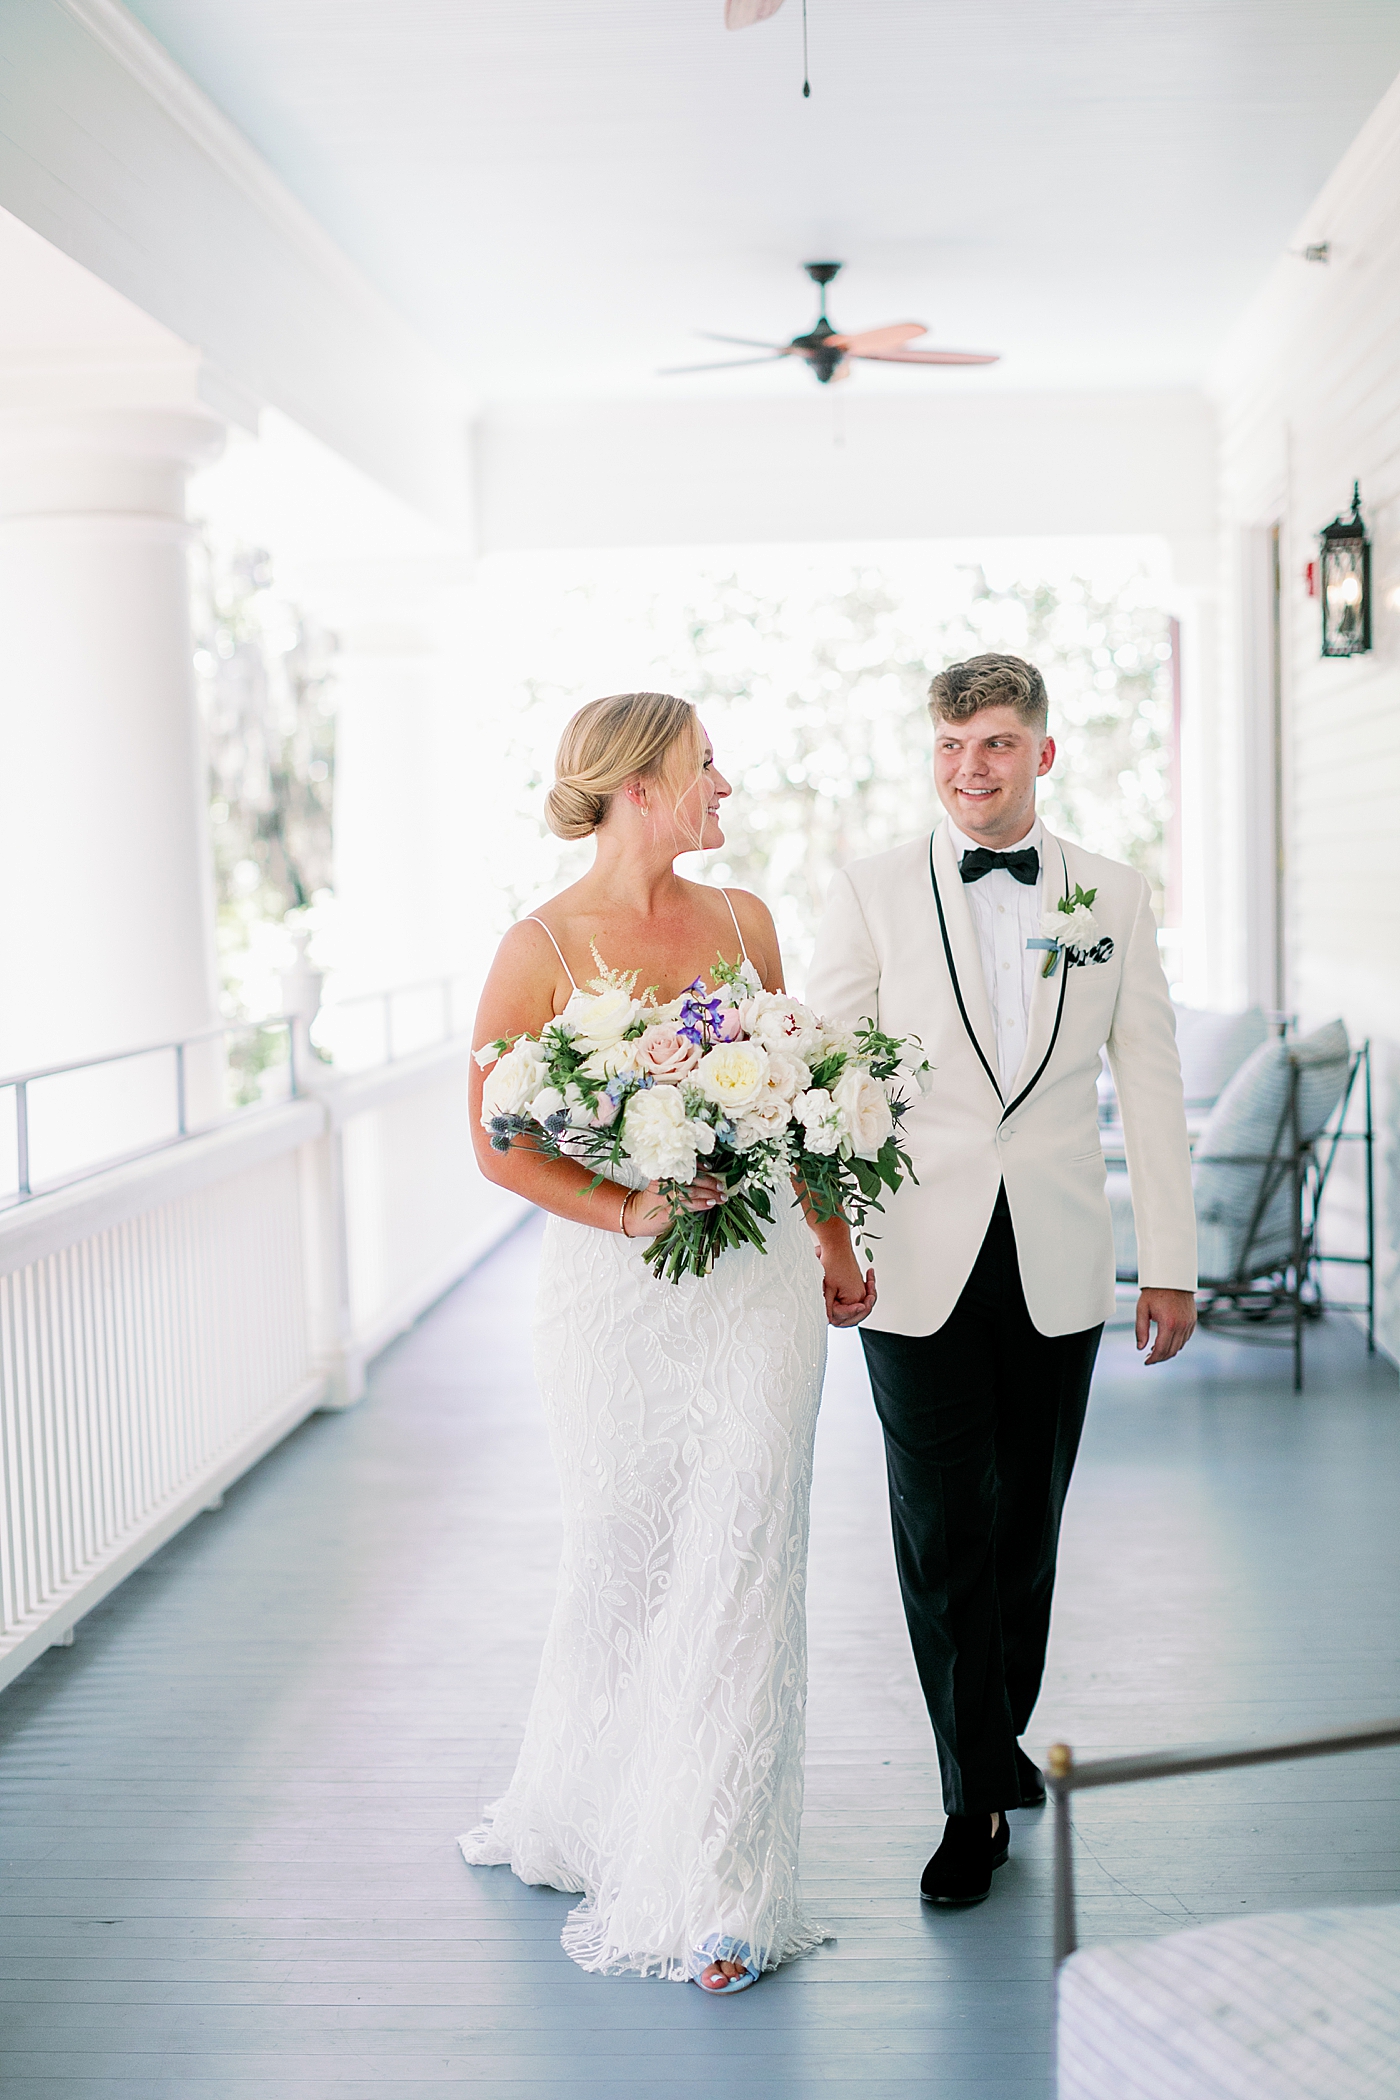 Bride and groom portraits on the porch | Images by Annie Laura Photography